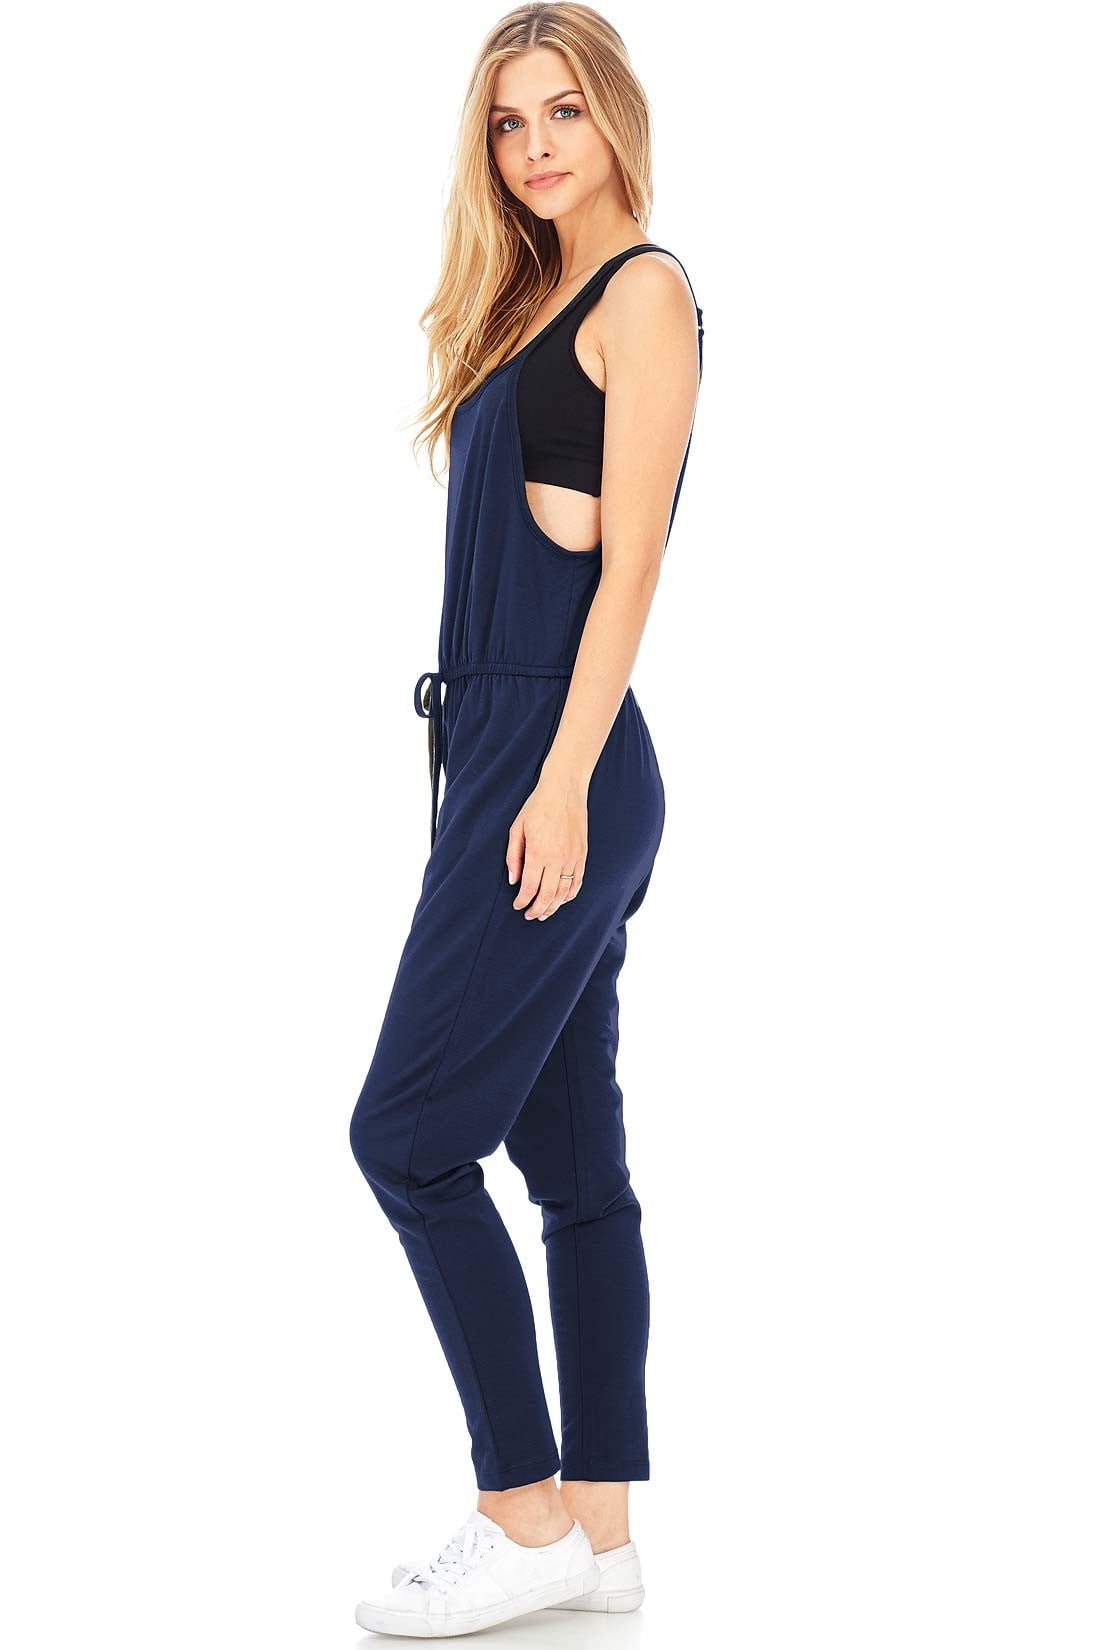 Ambiance Apparel Women's Juniors Terry Cloth Jumpsuit (S, Navy)